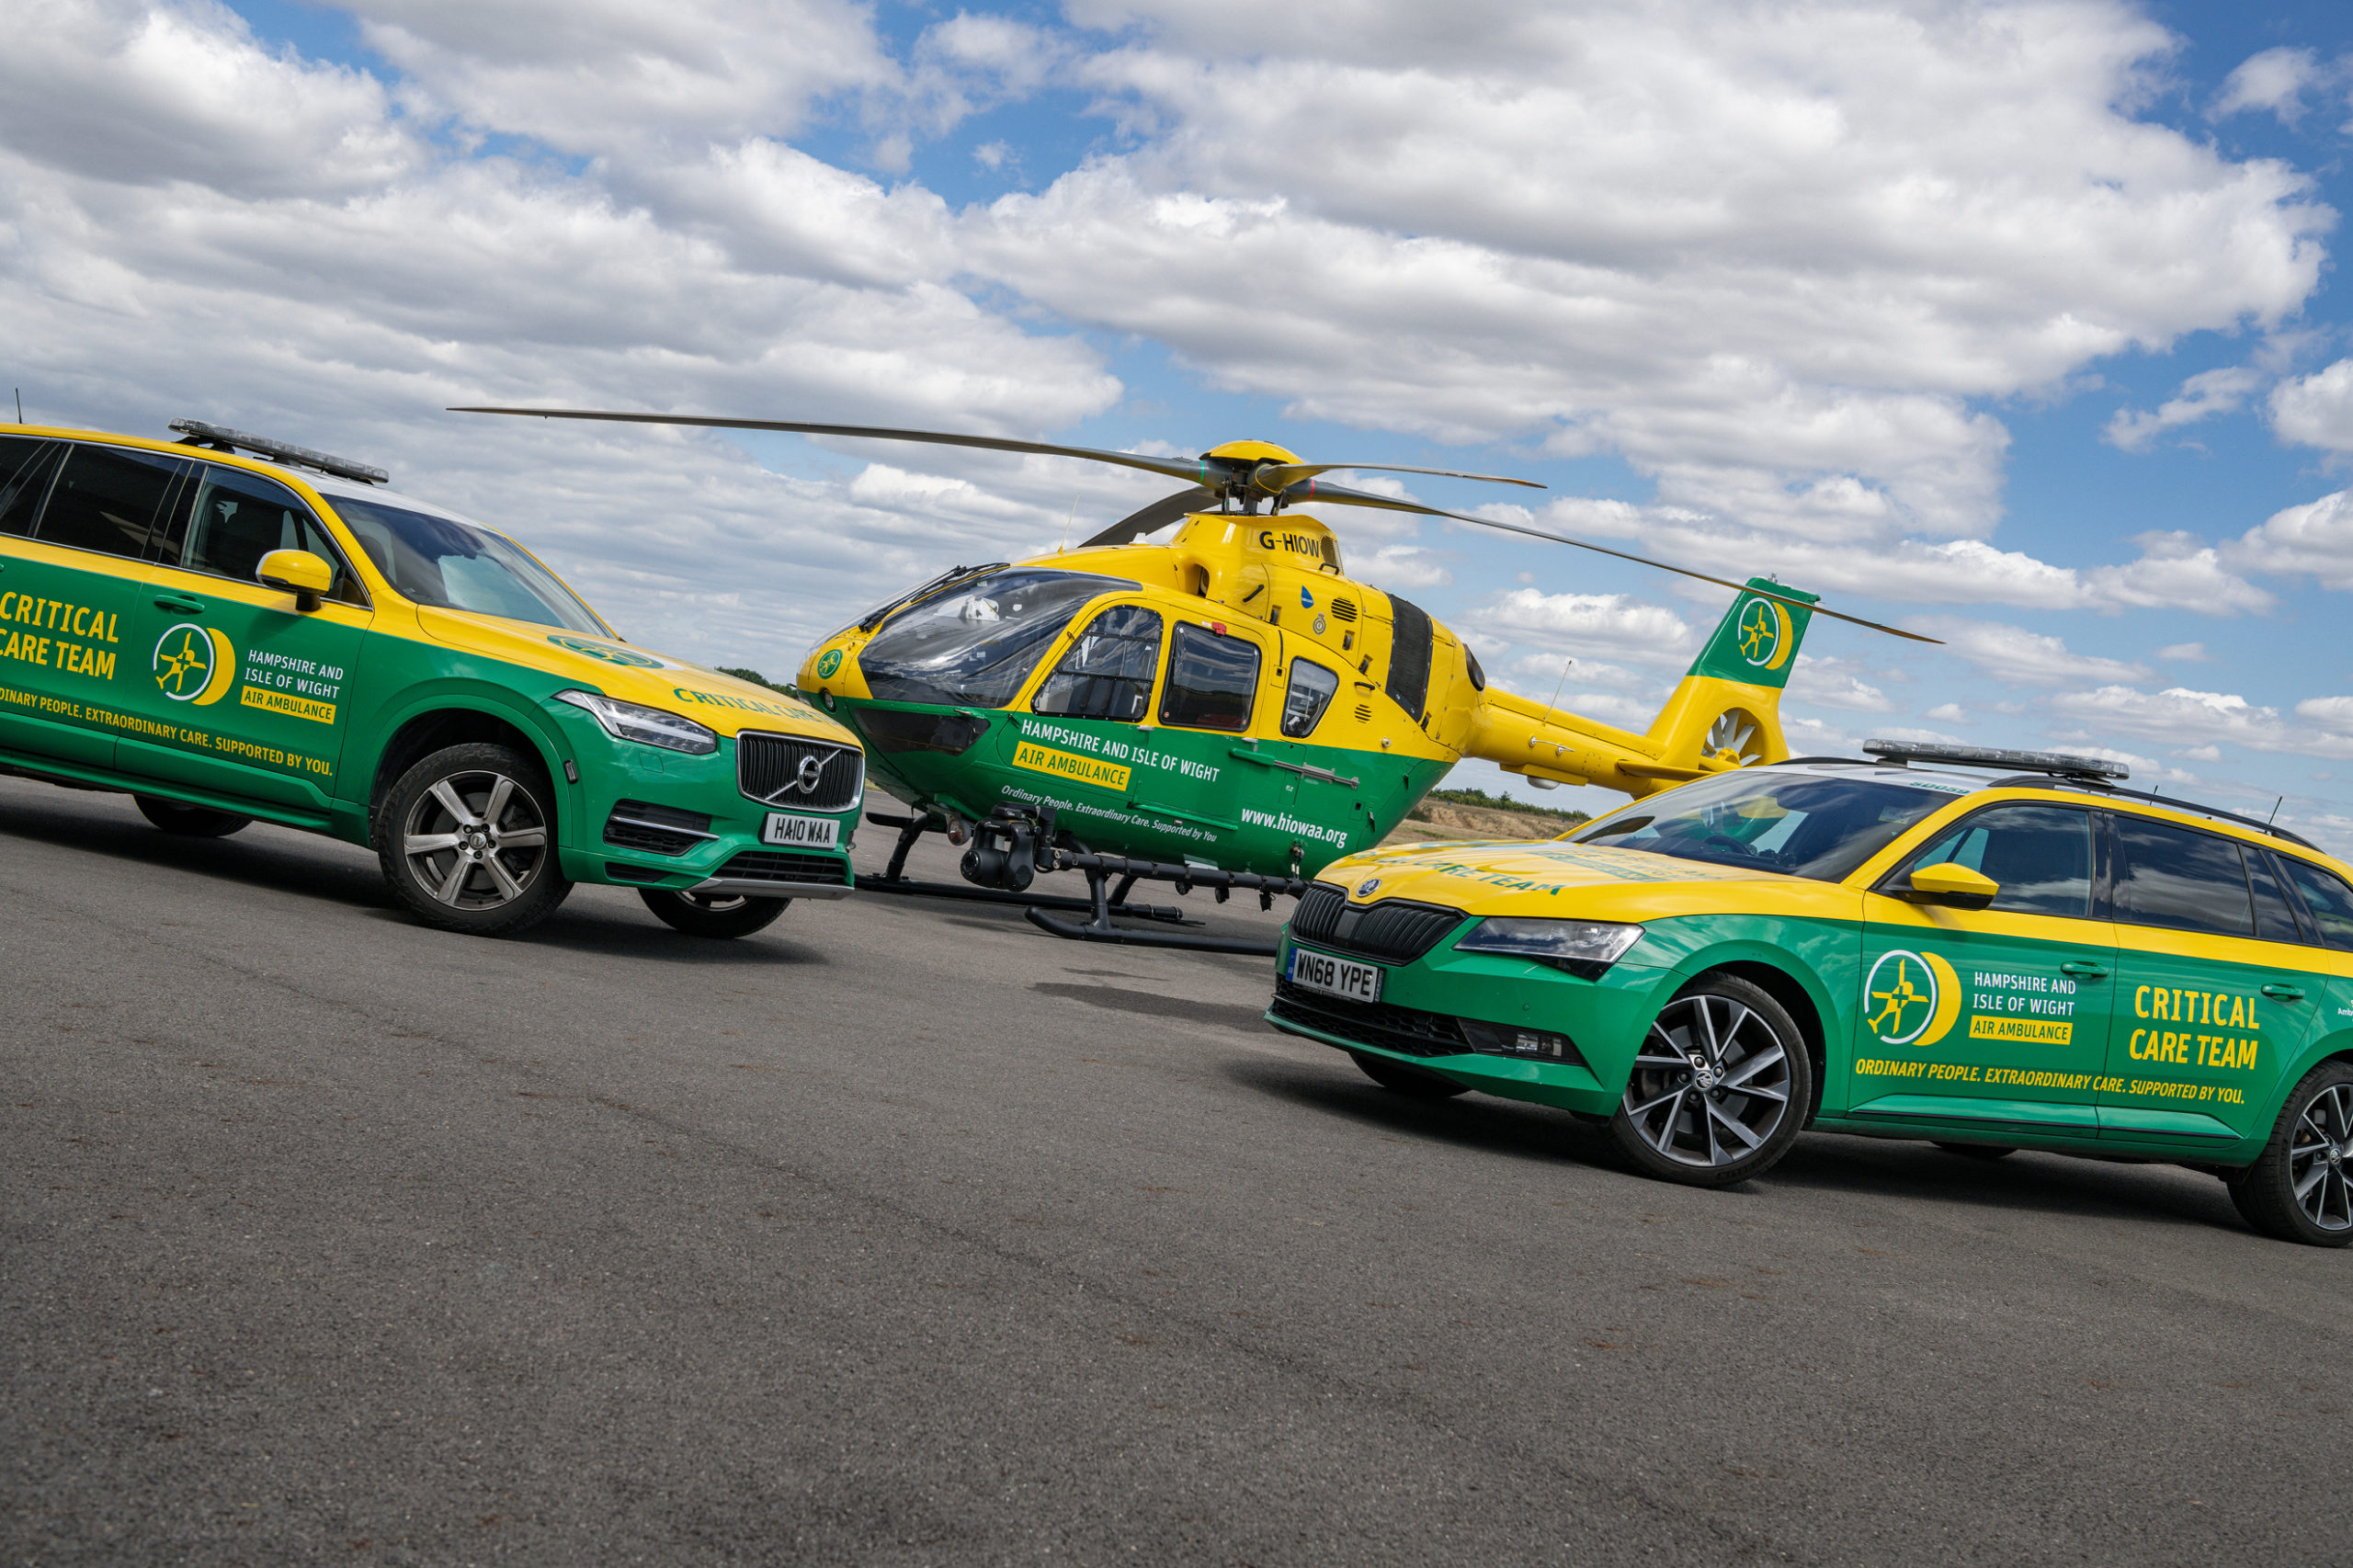 Two emergency road ambulance cars and a helicopter